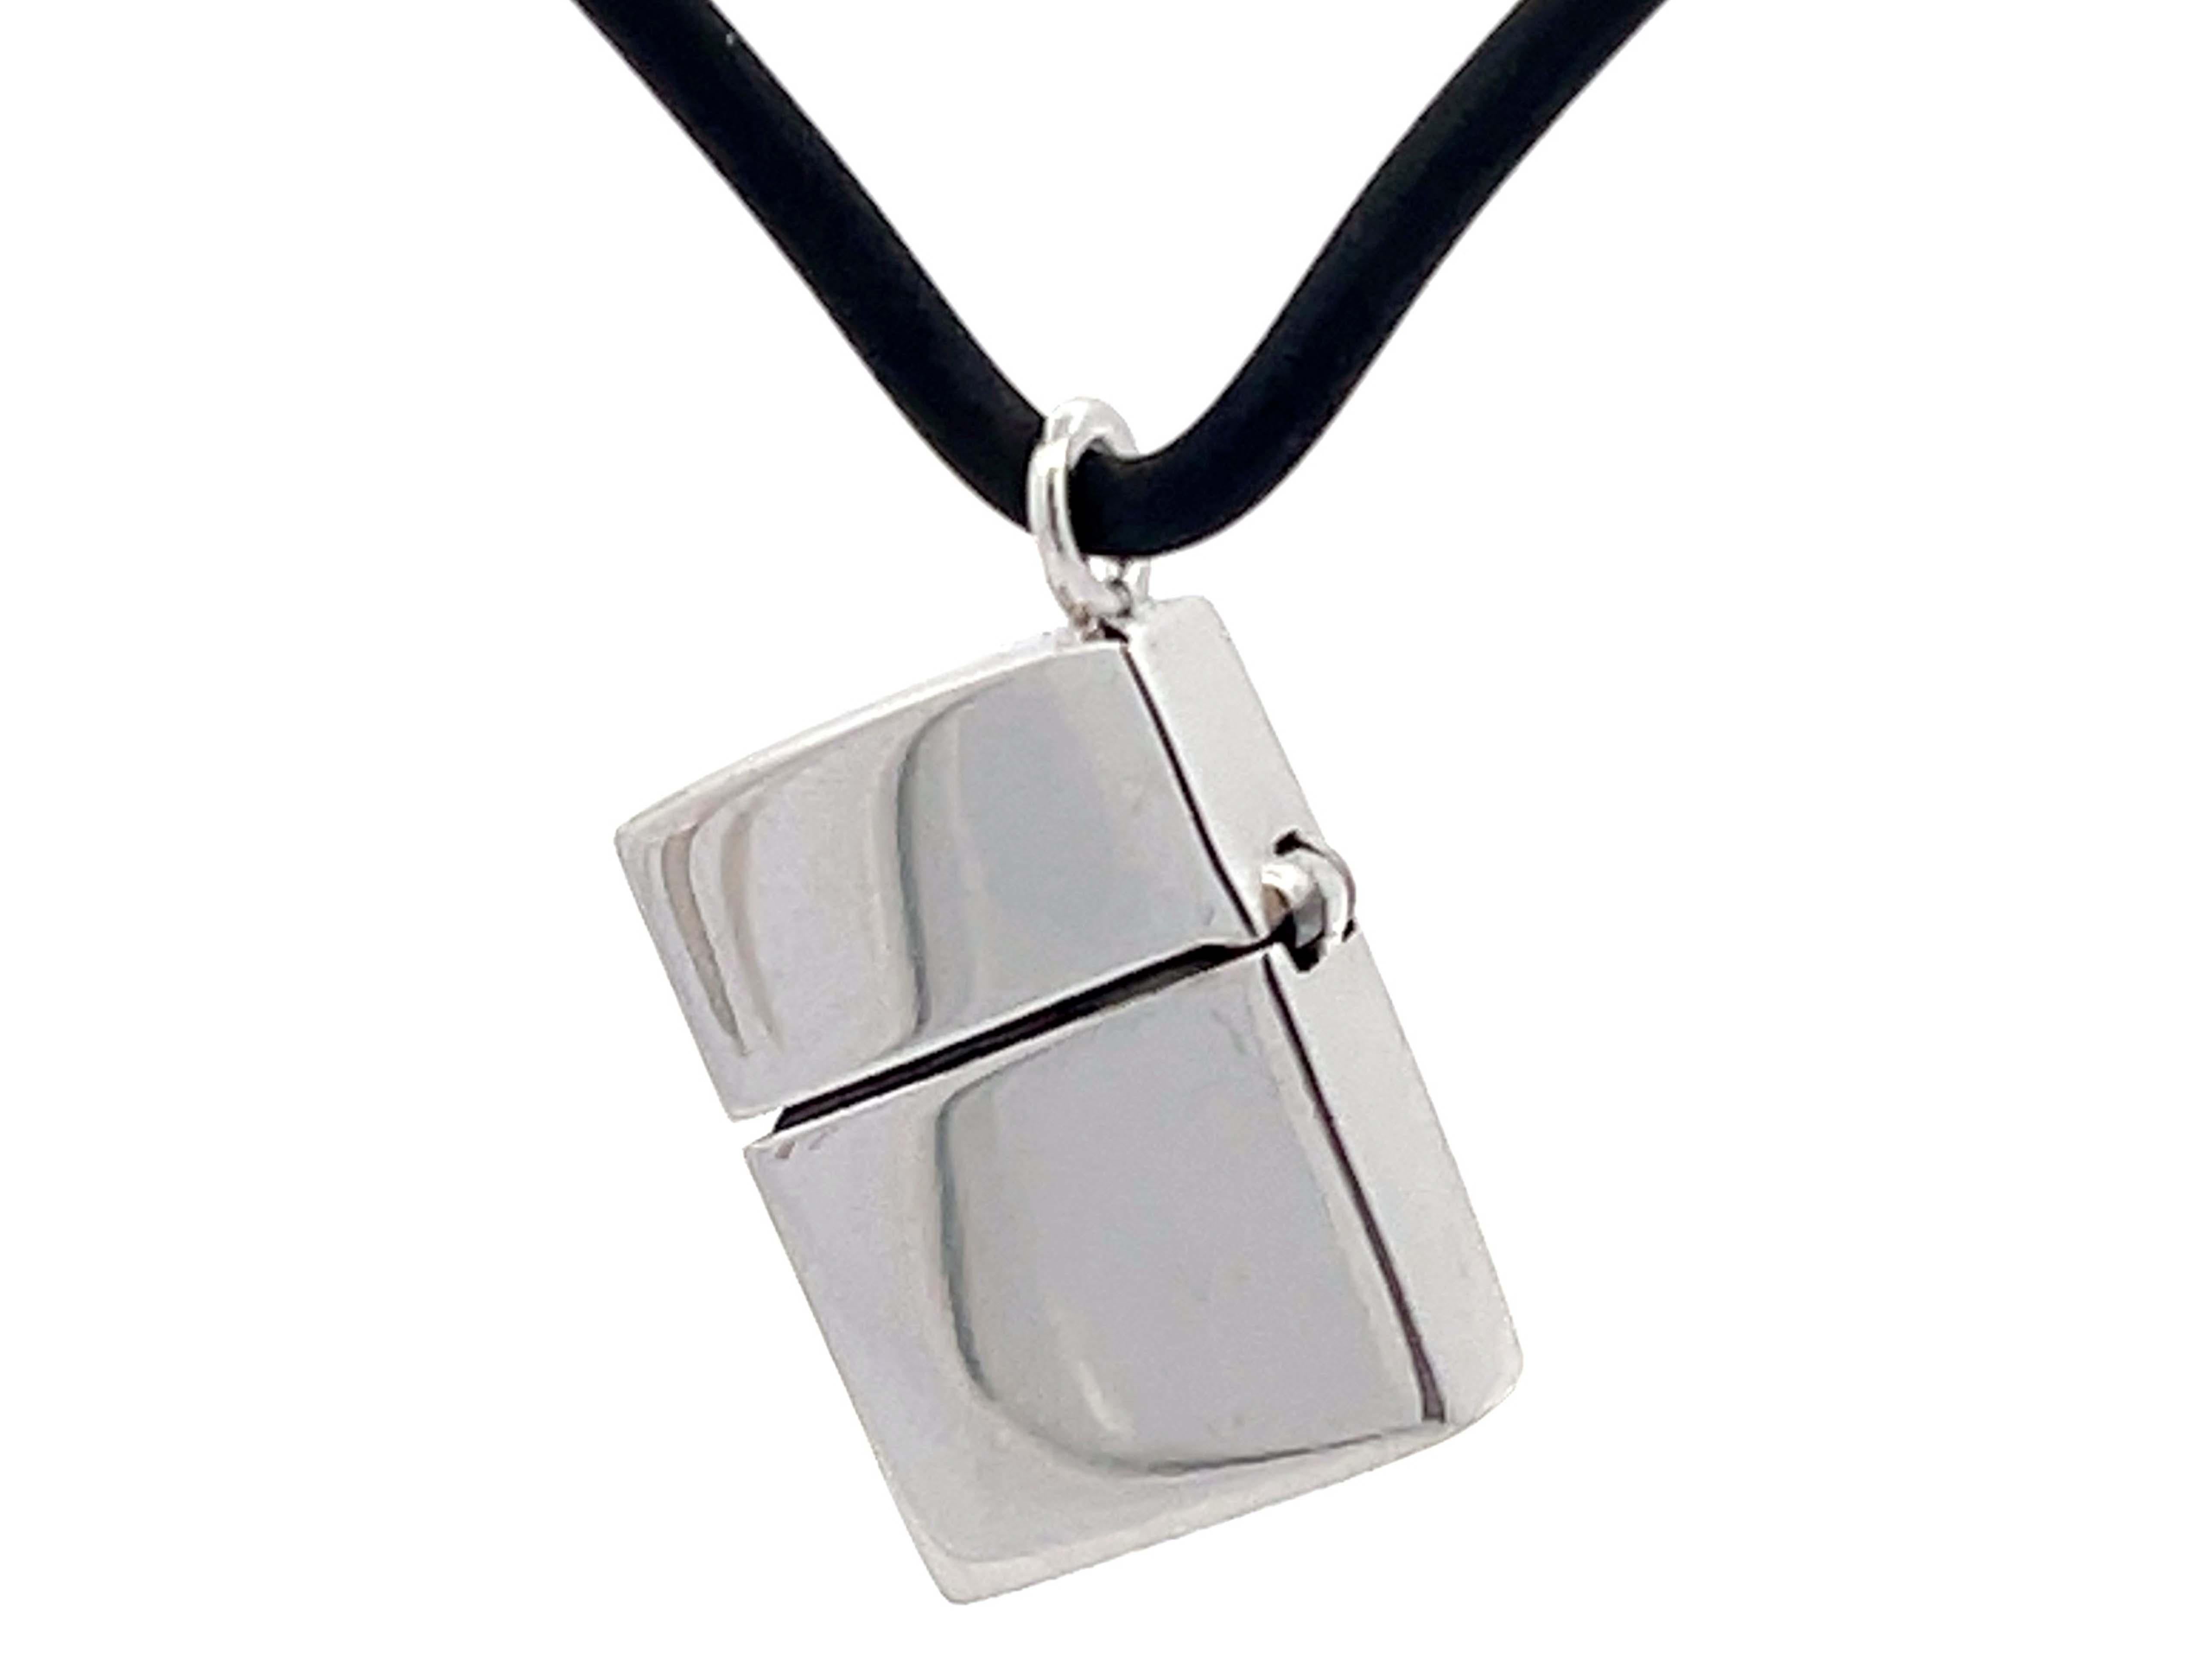 Zippo Lighter Pendant With Black Diamonds in 18k White Gold on Rubber Cord. There is ~0.12 carats of black diamonds. The pendant is approximately 16.5 mm x 12.2 mm and hangs on a 20